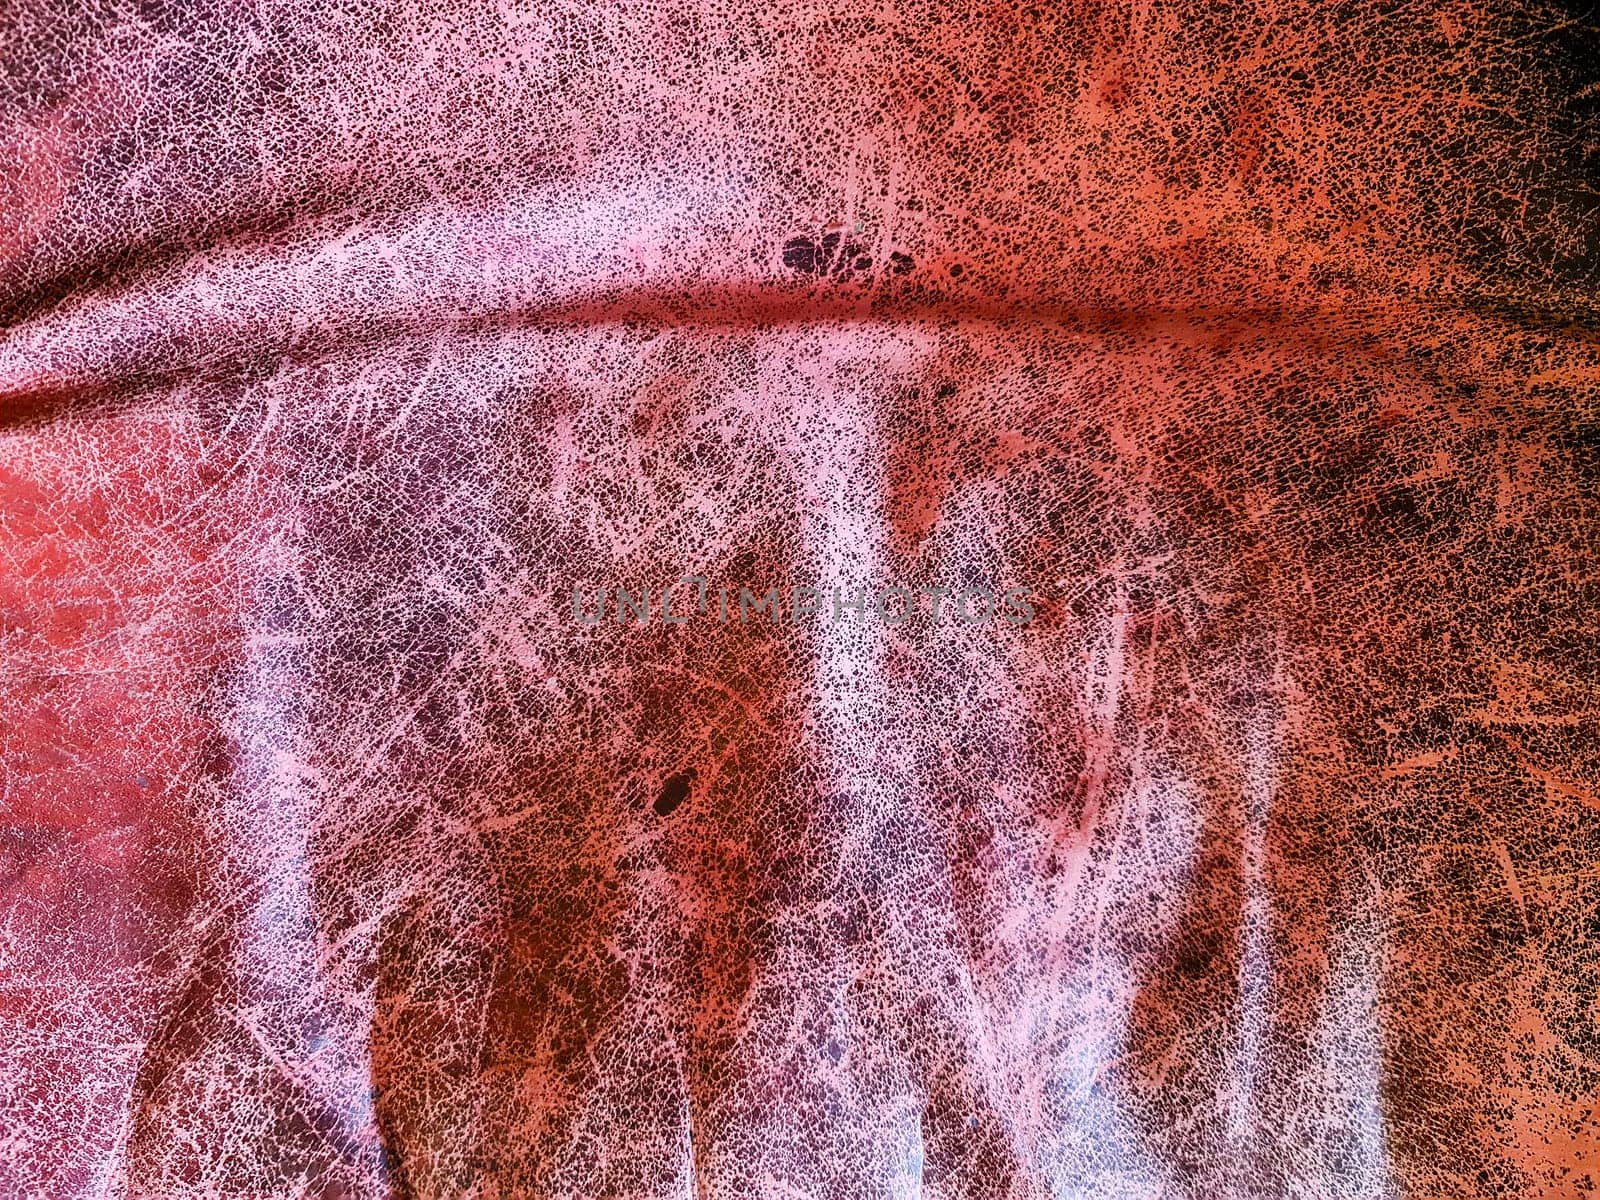 Surface texture of old crumpled leather